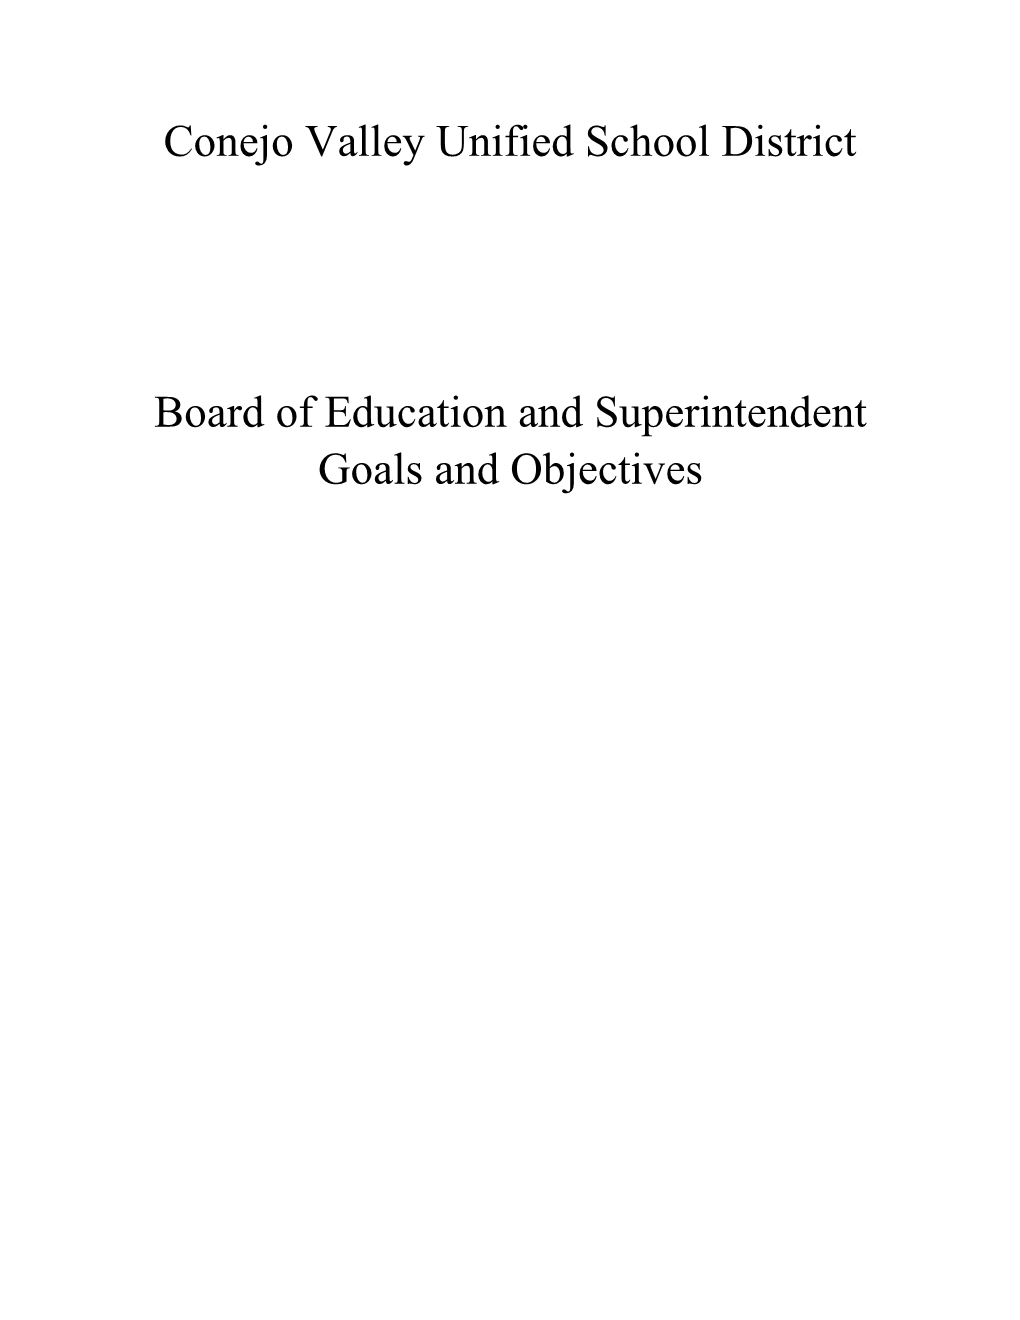 Conejo Valley Unified School District Board of Education and Superintendent Goals and Objectives